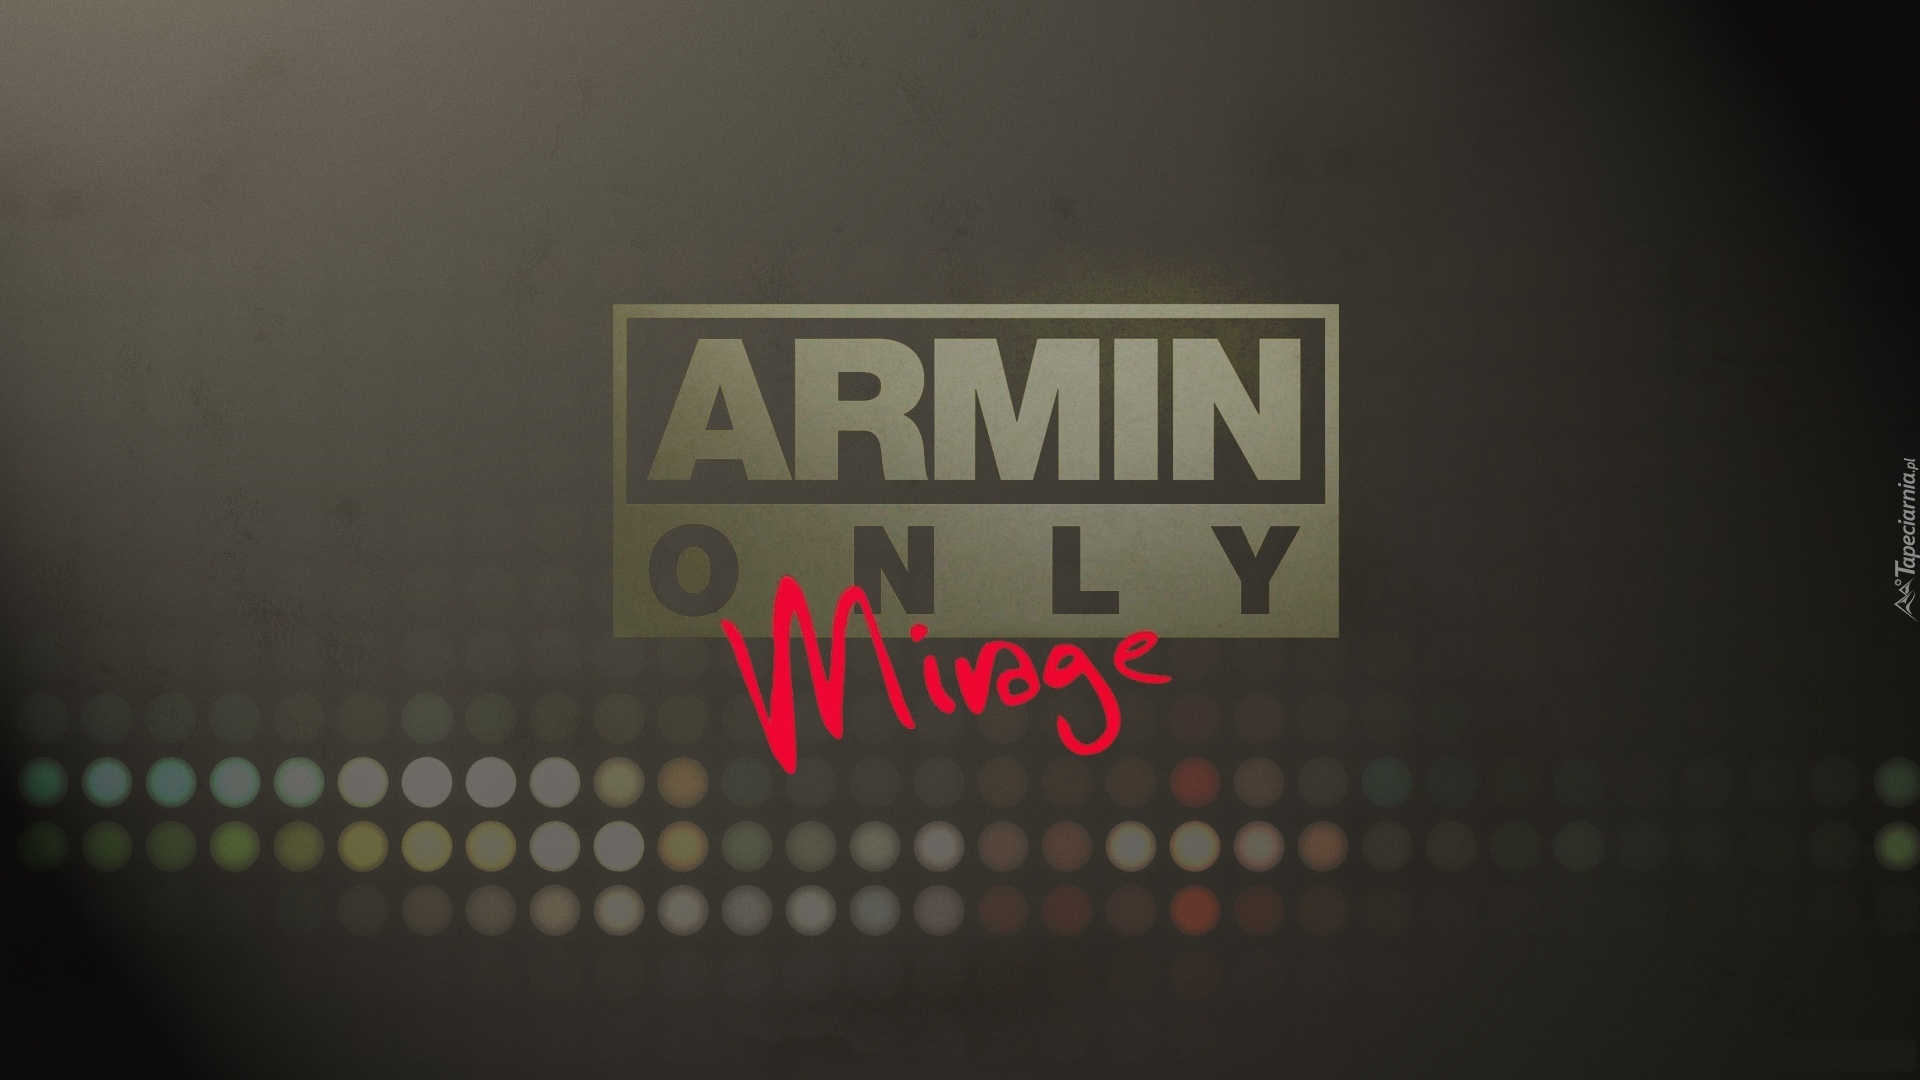 Armin, Only, Mirage